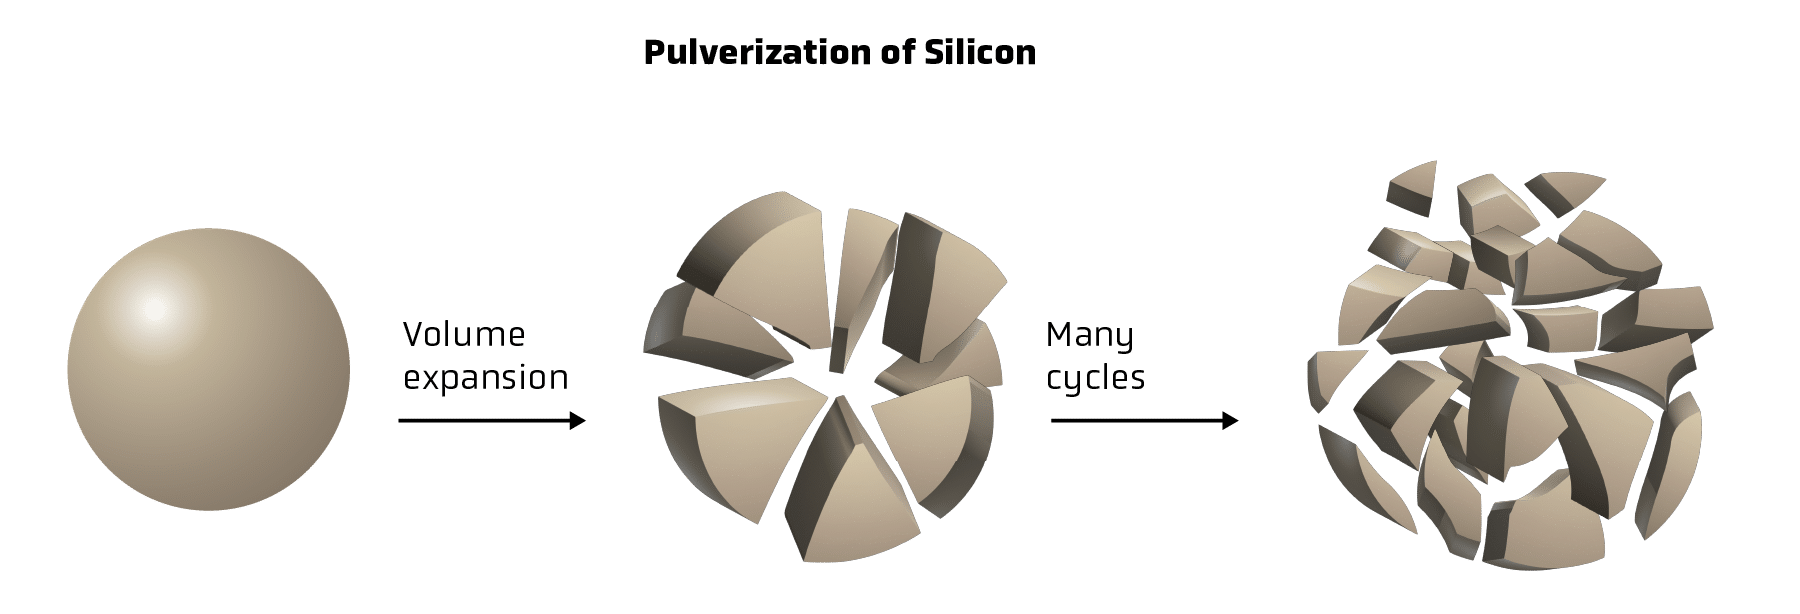 Graphic showing the pulverization of silicon